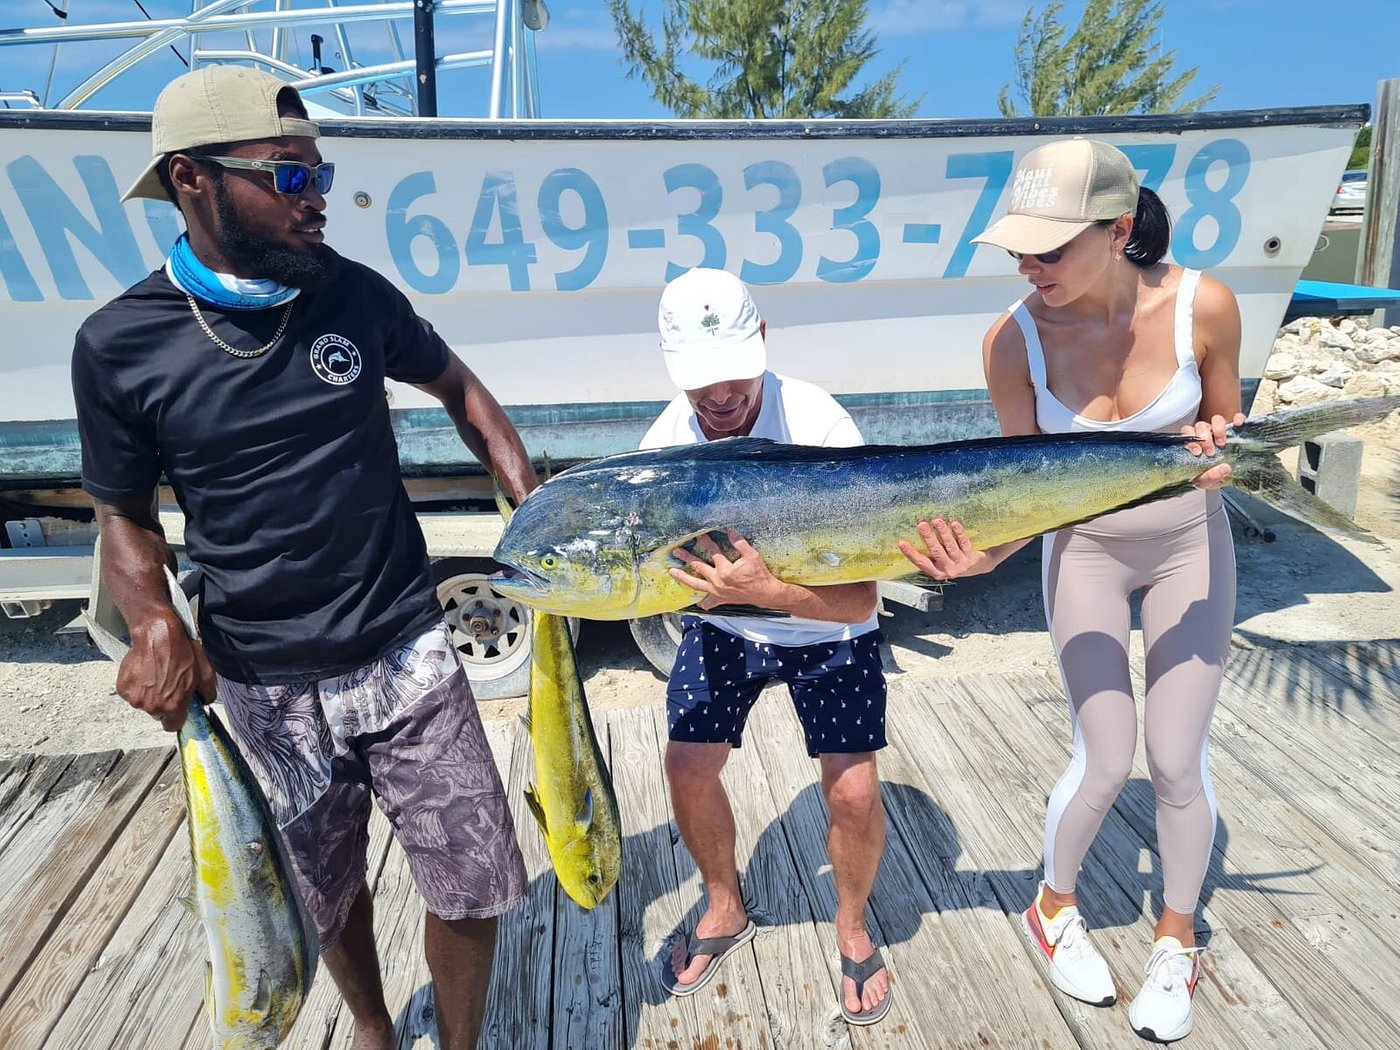 Full Day Reef Fishing Charter in Providenciales